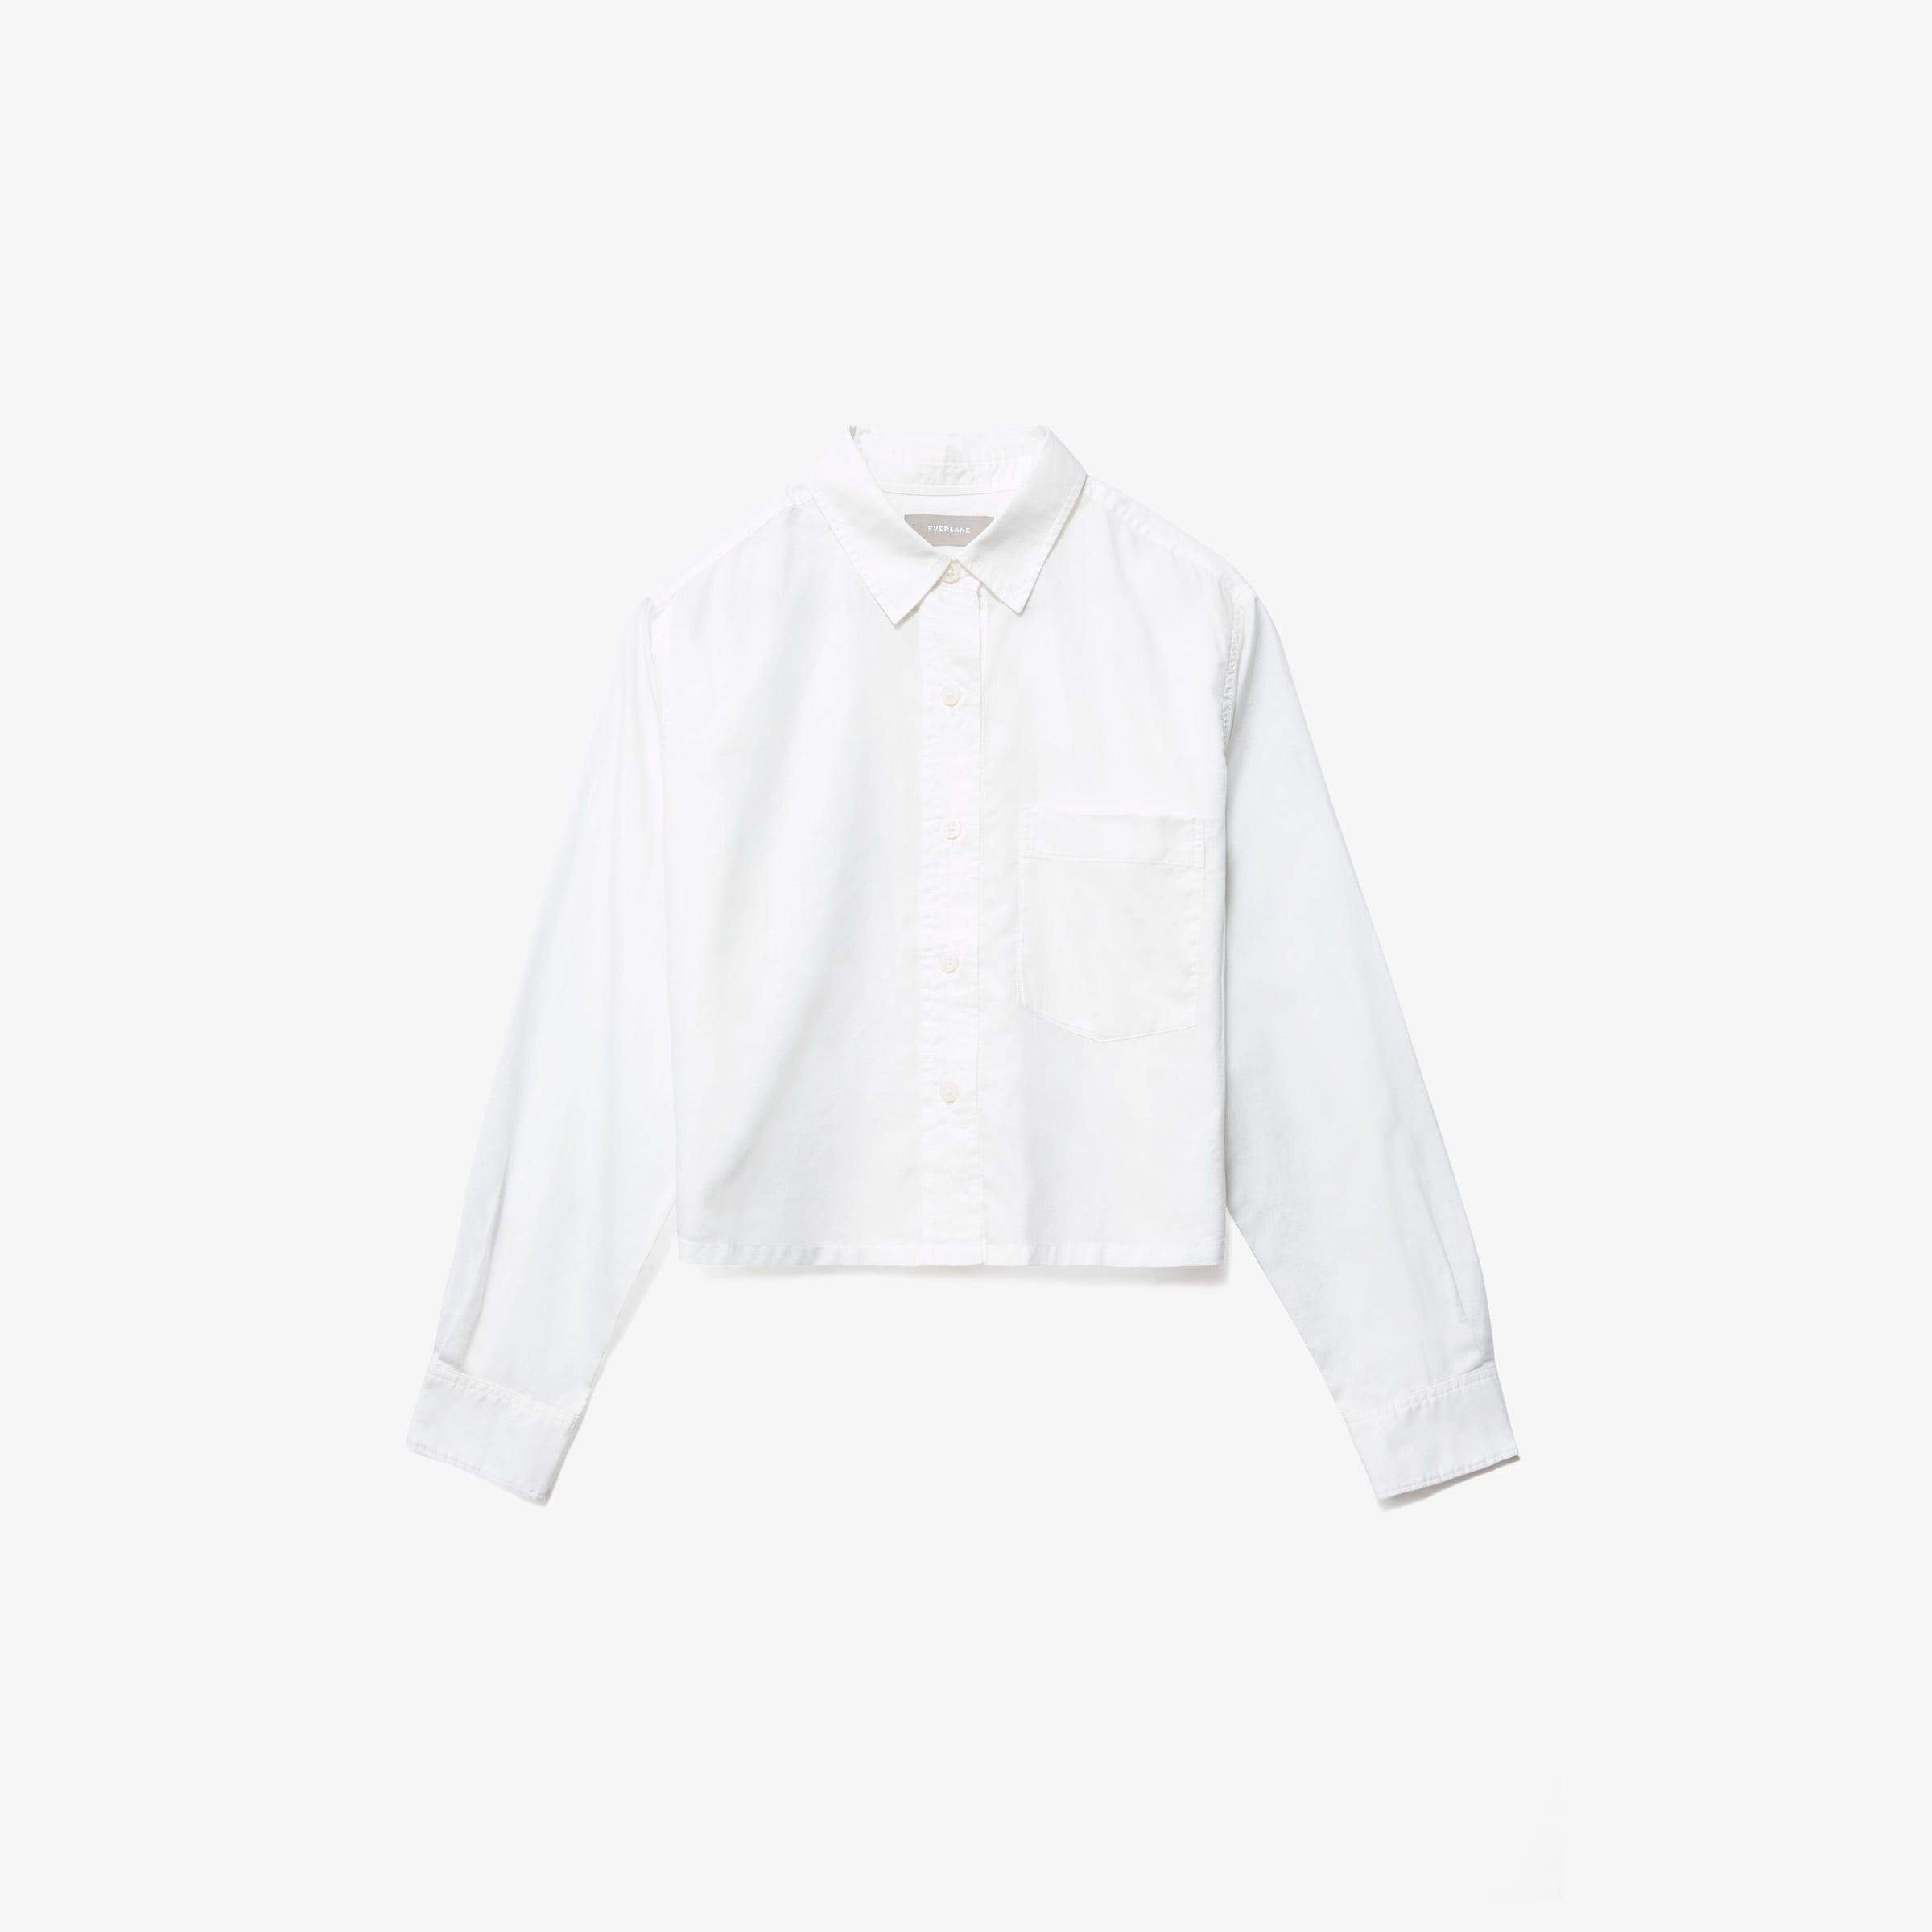 The Silky Cotton Way-Short Shirt by EVERLANE